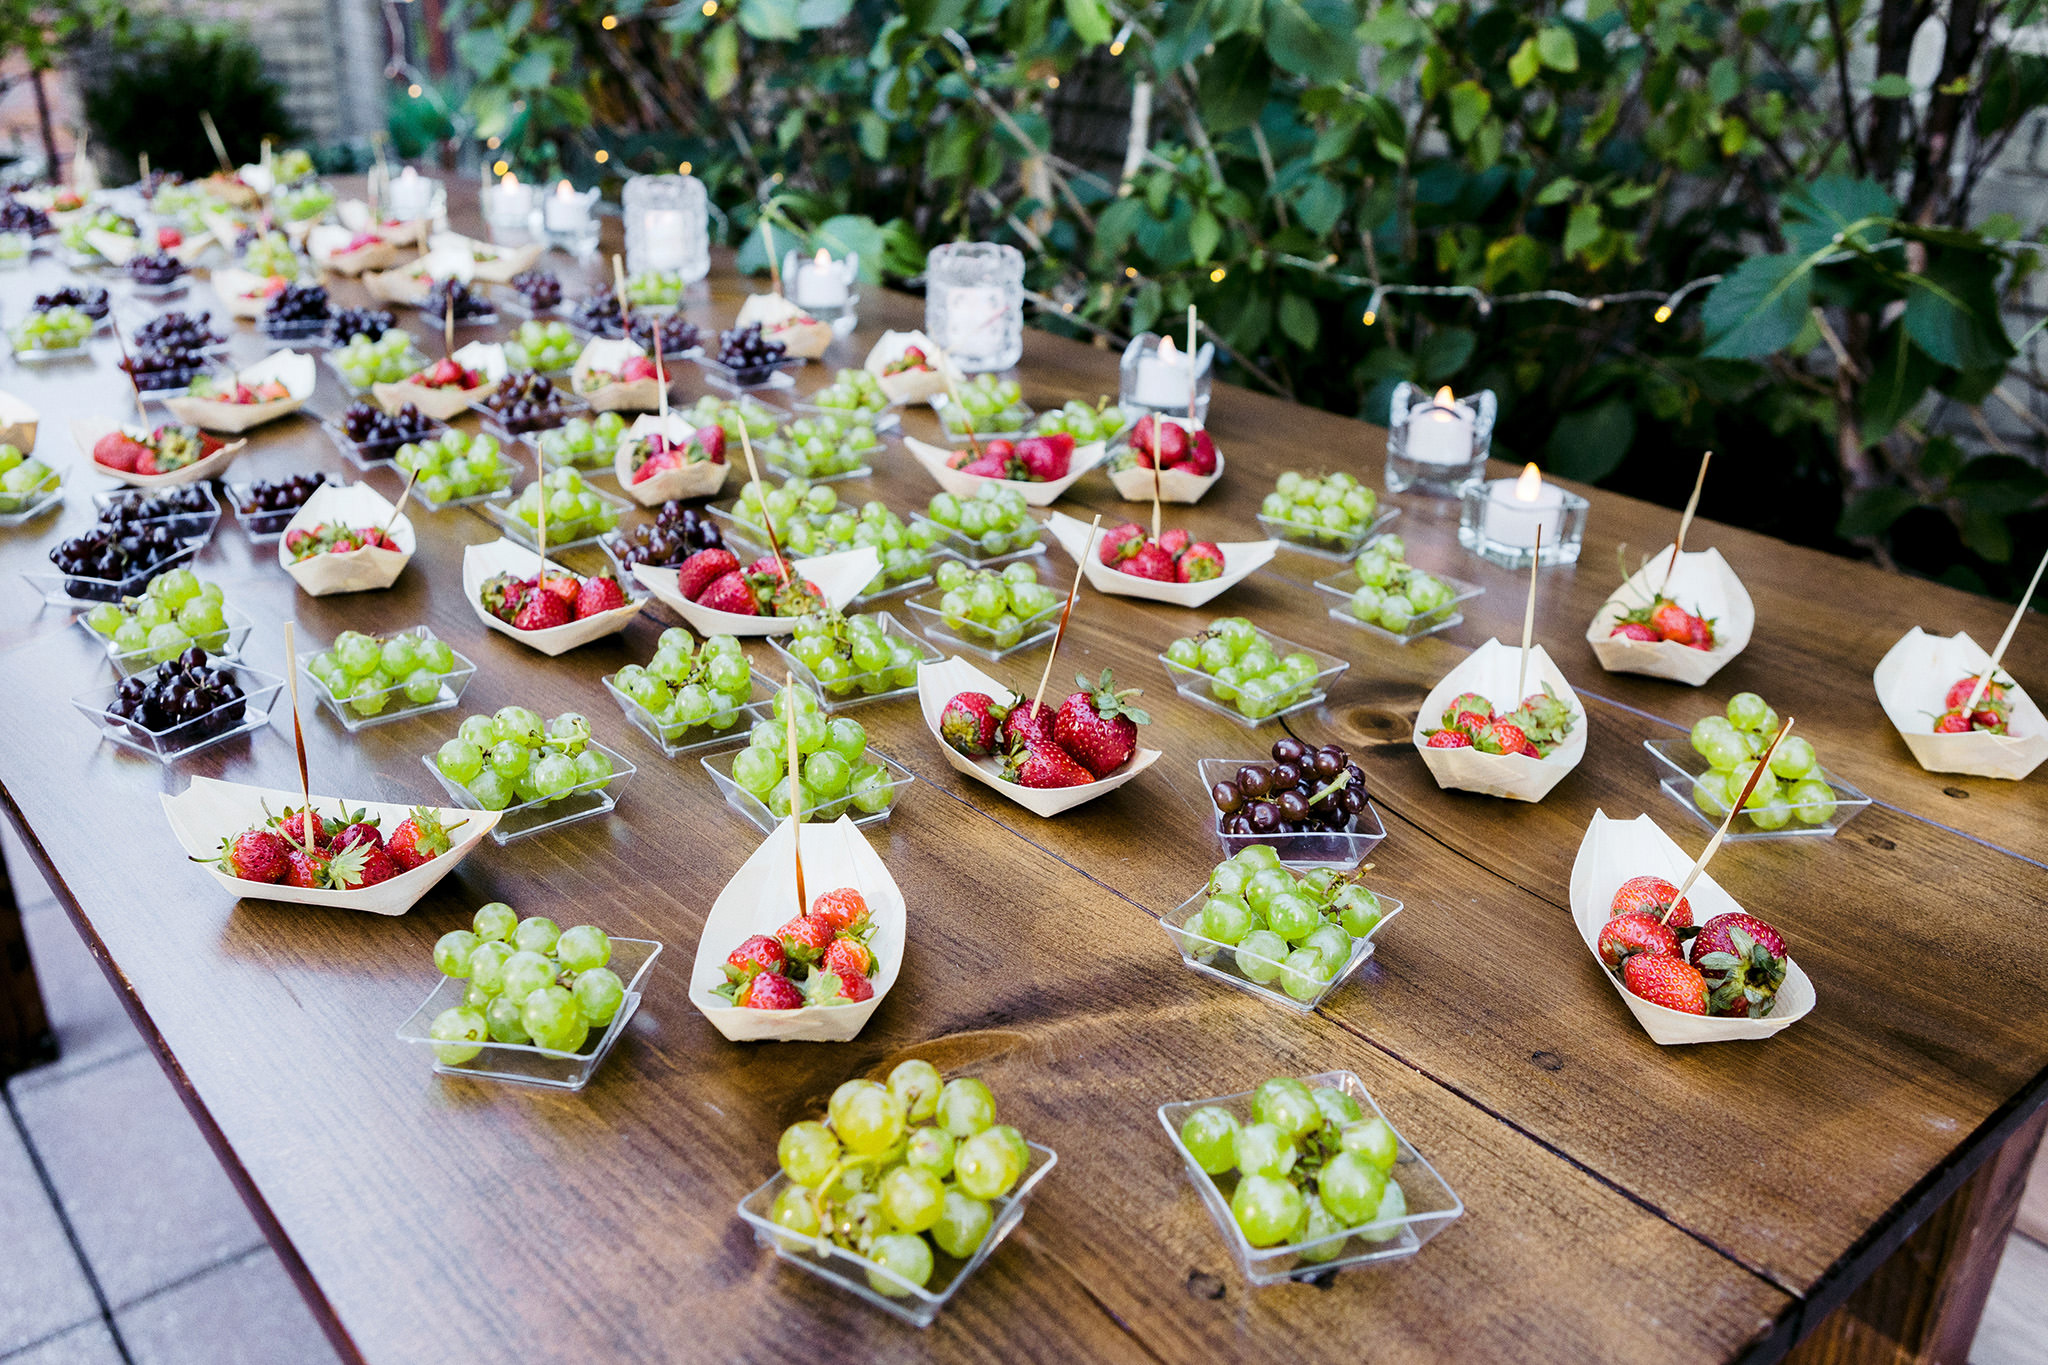 Small plates of fruit at a wedding